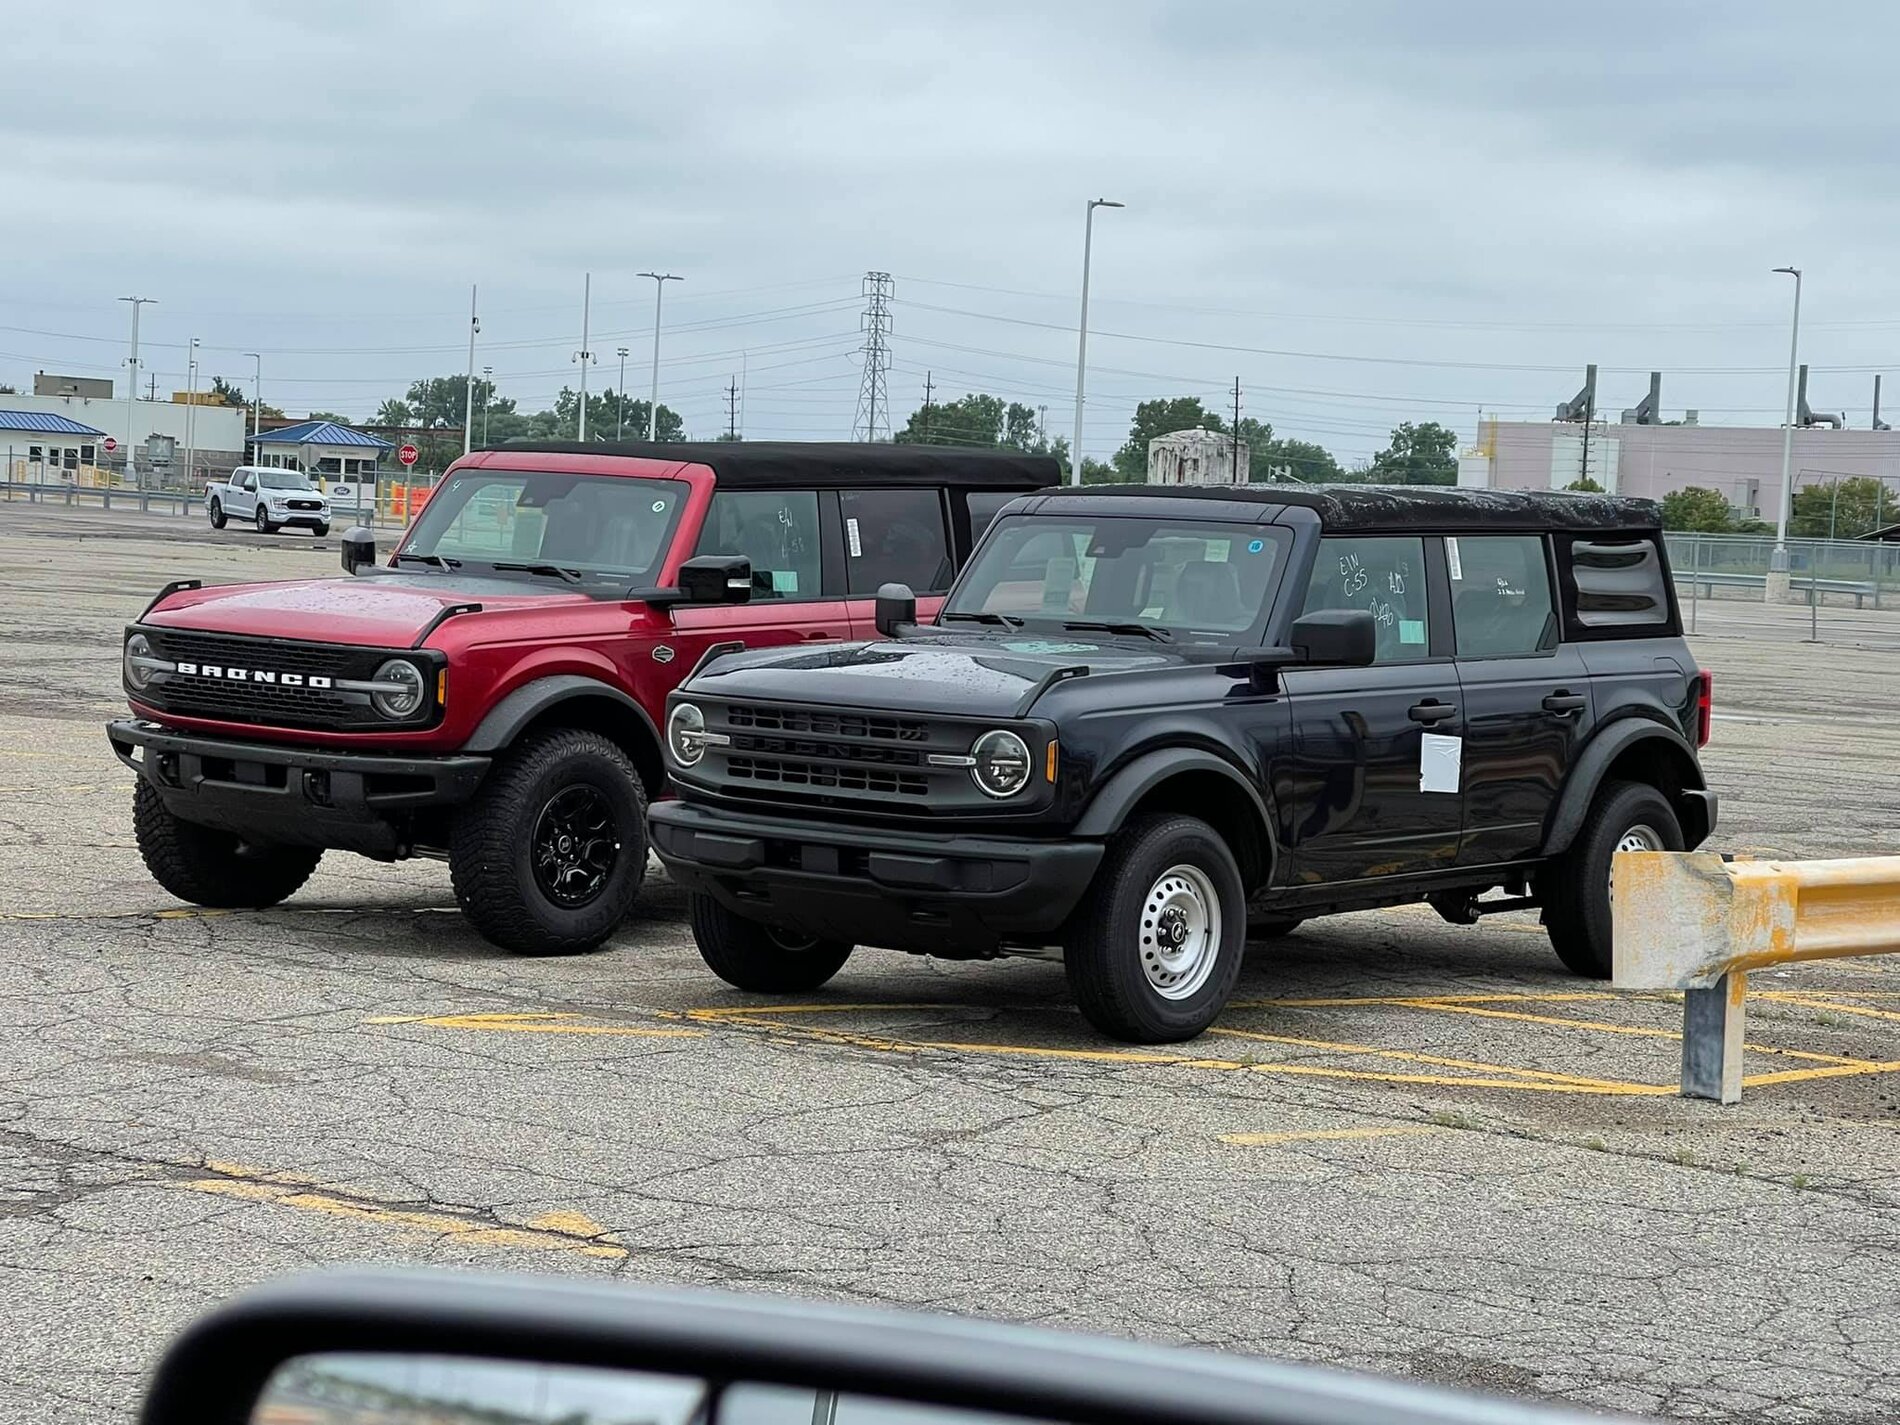 Ford Bronco Wildtrak vs Base Bronco 4-Door Side-by-Side Shows Height and Equipment Difference 2021 Bronco -- Rapid Red Wildtrak + Shadow Black Base 4-Doors 1